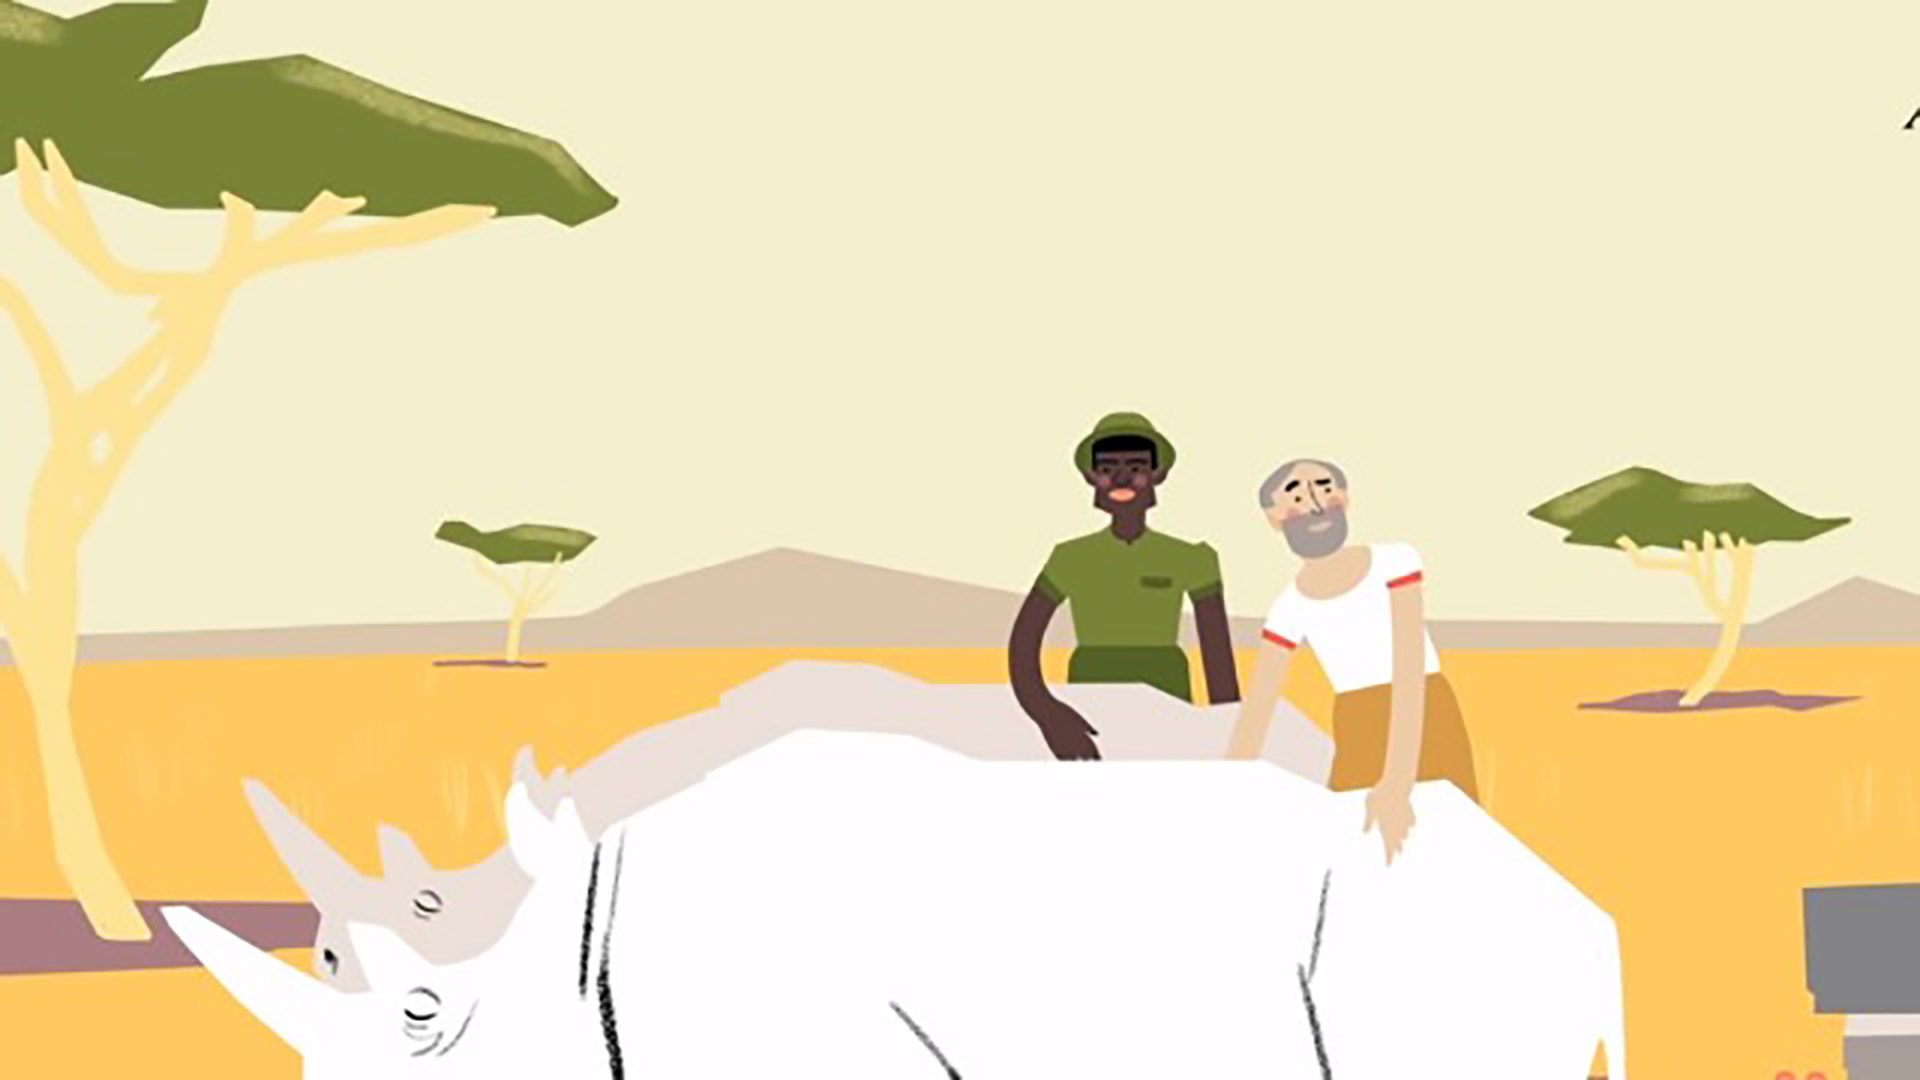 Ted-ed Climate - White Rhinos